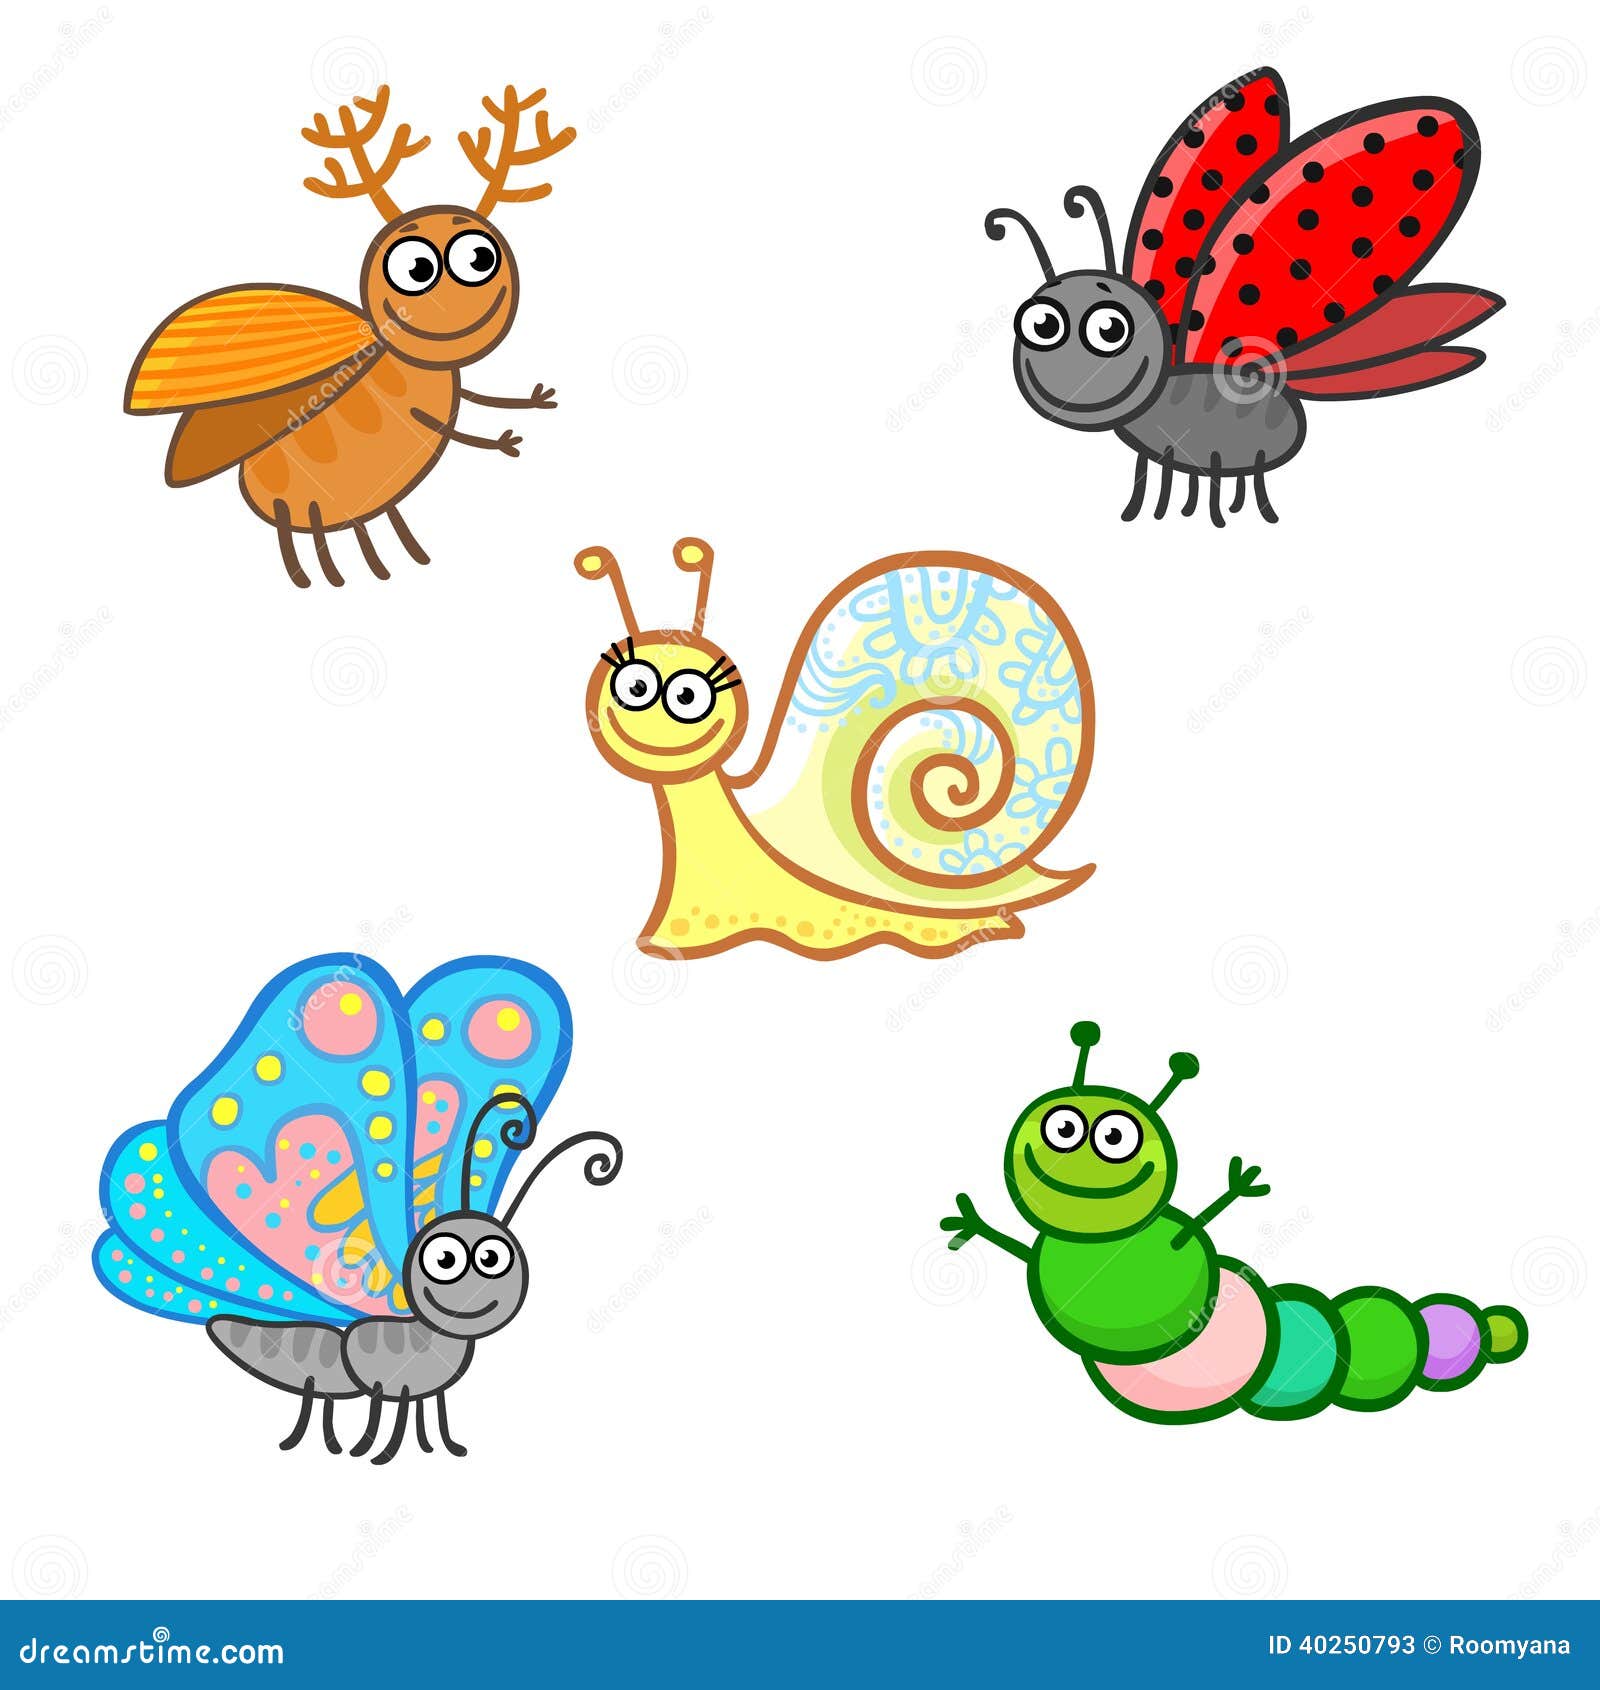 animated insect clipart - photo #37